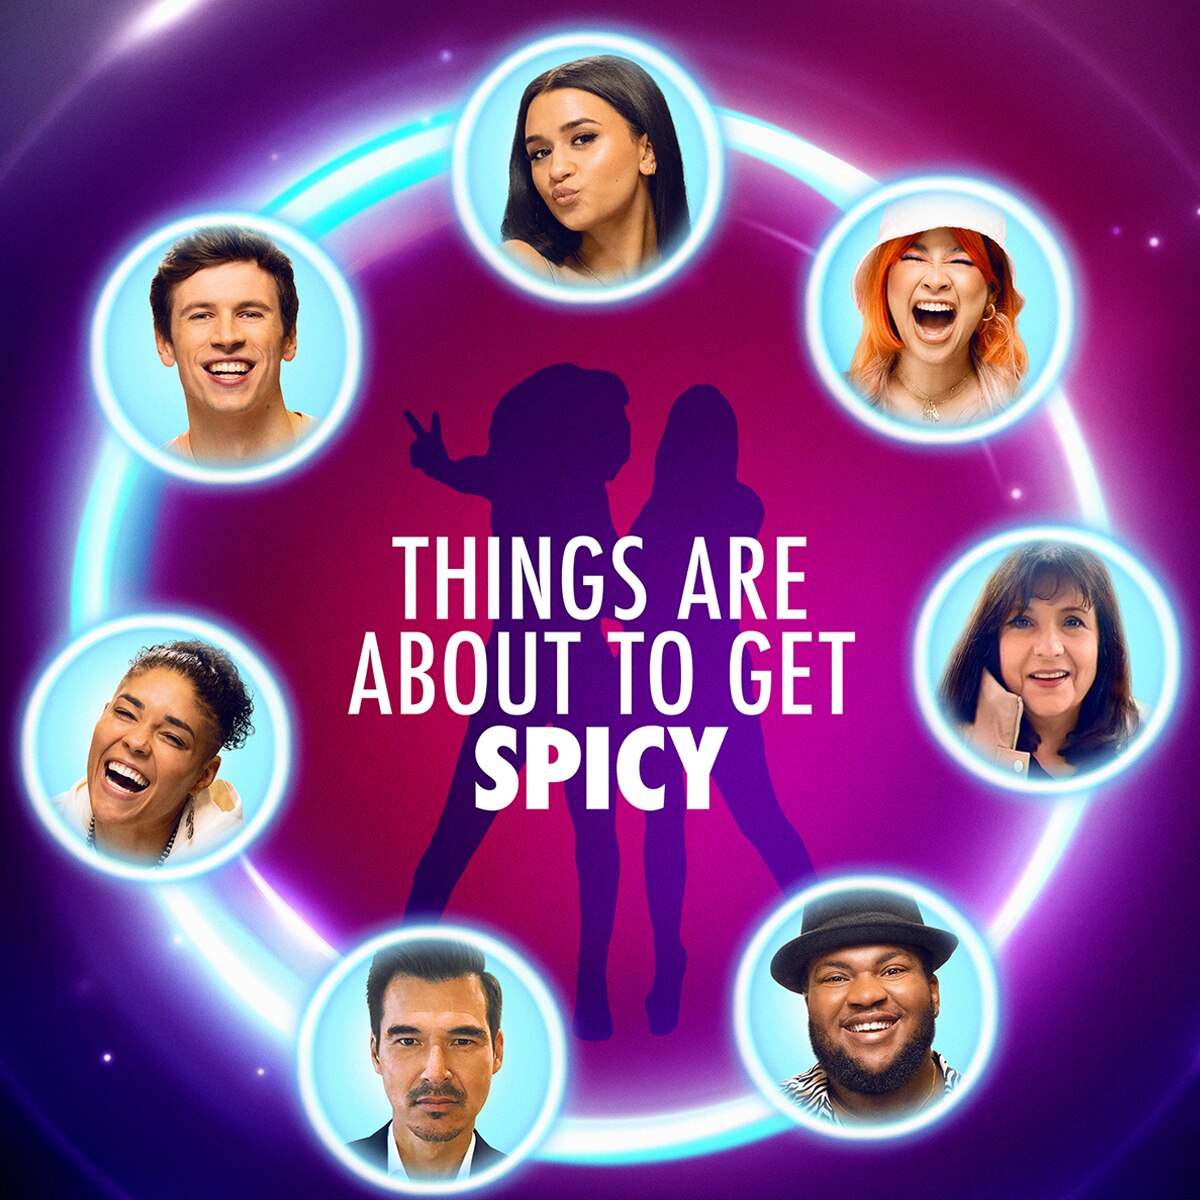 The Circle Spices Up the Cast With 2 Celebrity Contestants - E! Online